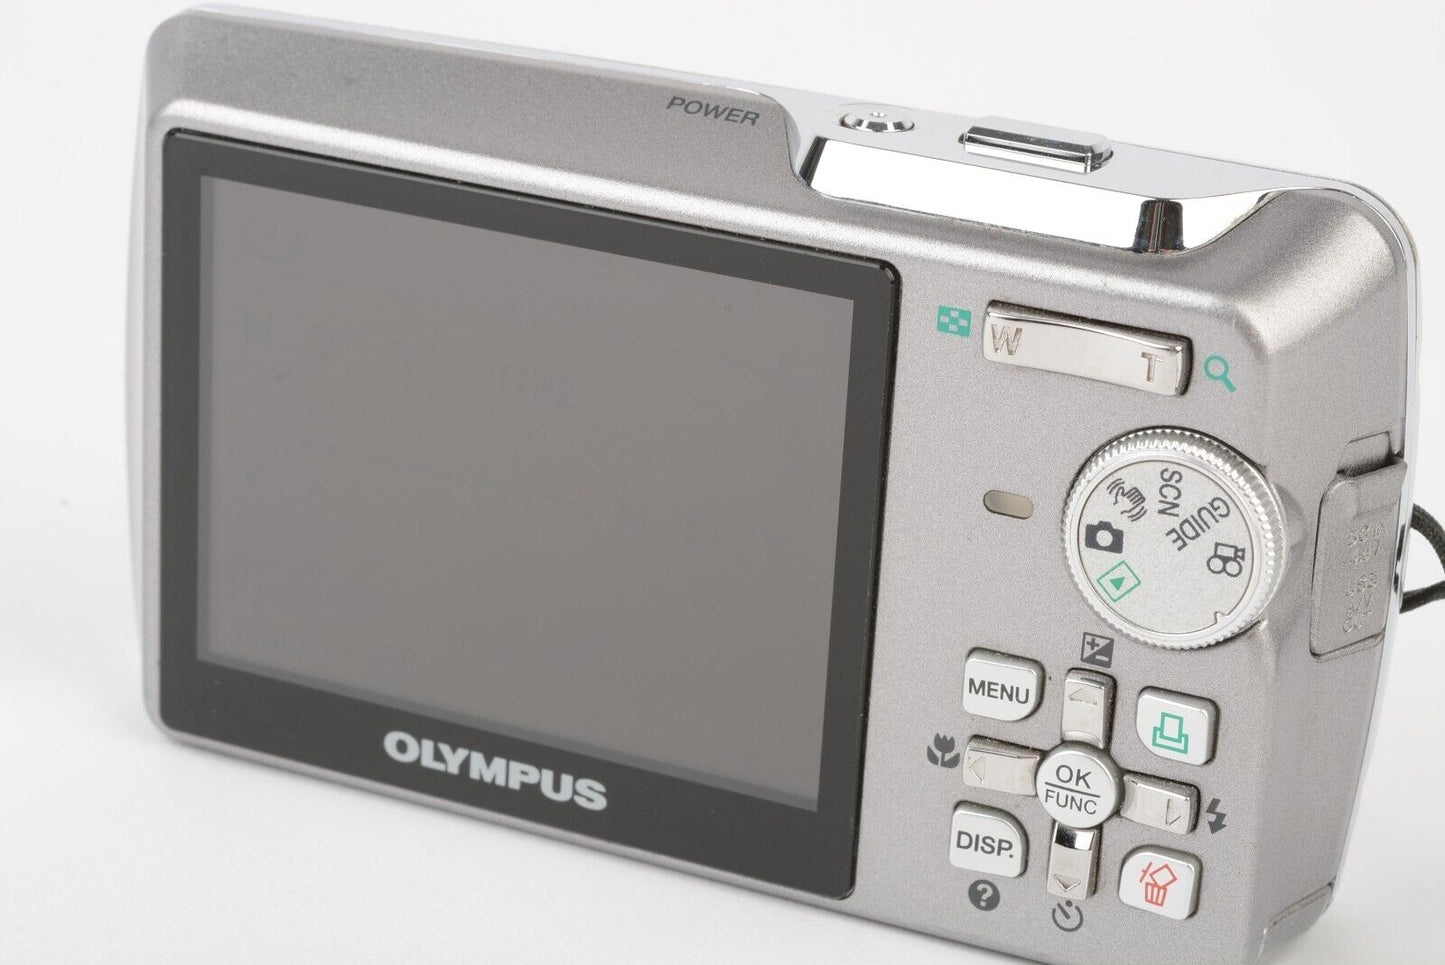 MINT- OLYMPUS 740 AW 7.1MP DIGITAL CAMERA, BOXED, 3BATTS=CHARGER+CABLES+1GB XD